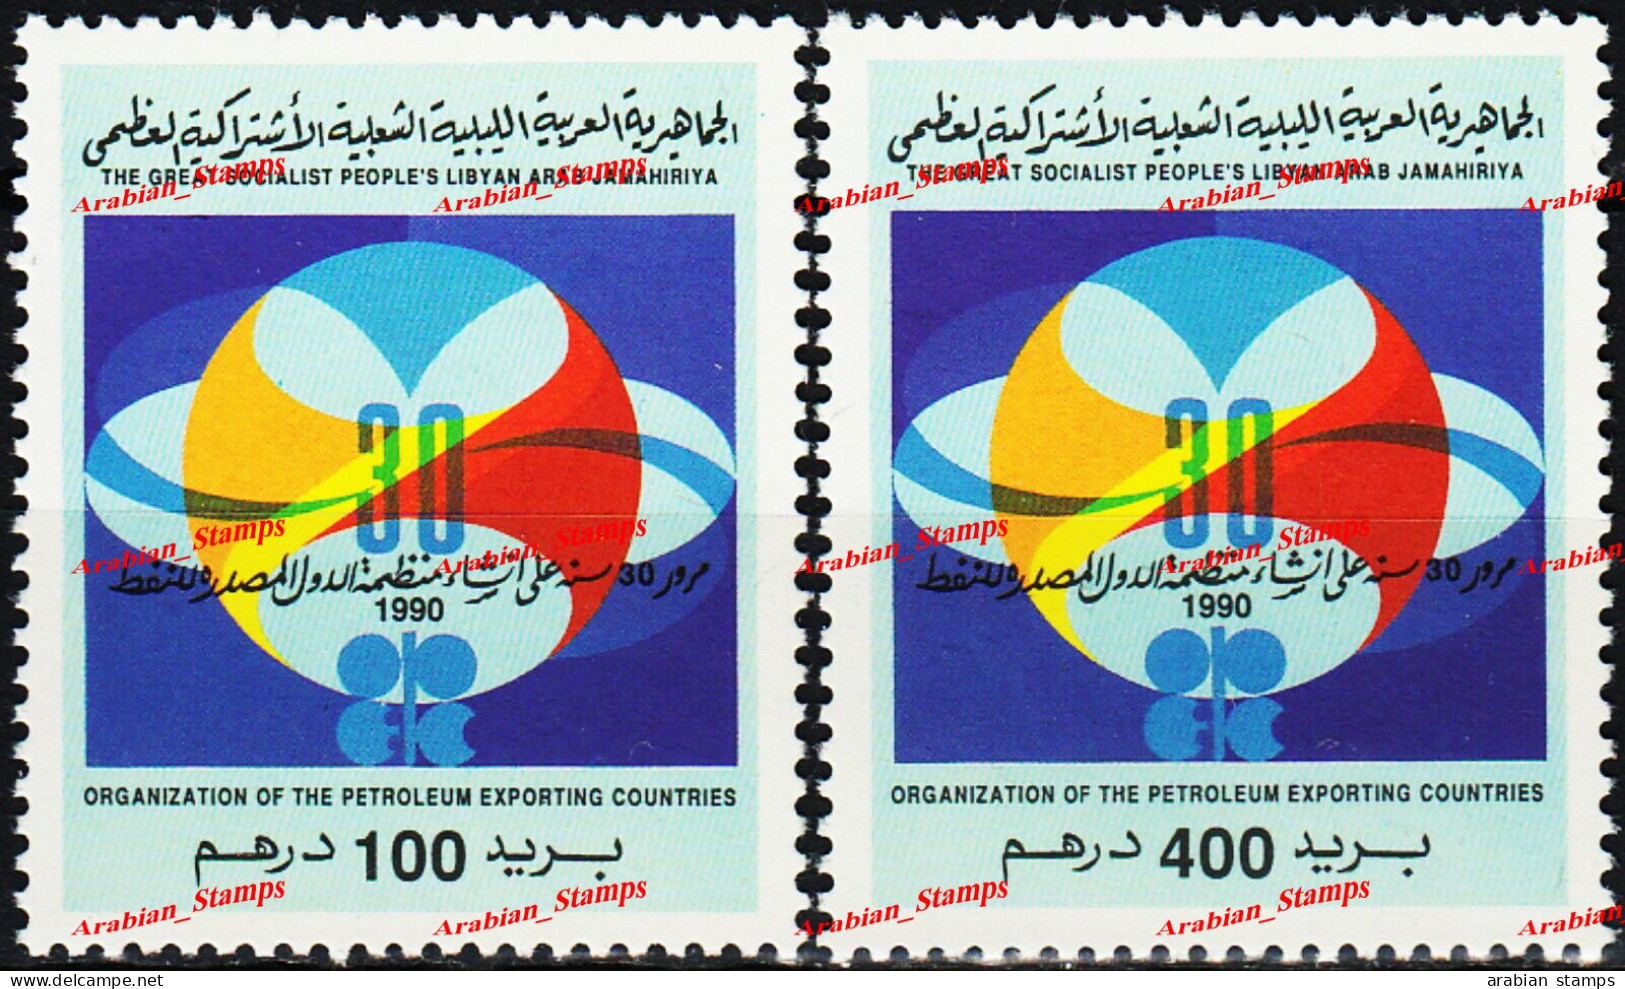 LIBYA LIBYEEN LIBYE OPEC OPEP OIL 30TH ANNIVERSARY MNH 1990 JOINT ISSUE SHIPS MARINE REFINERY RARE JOINT ISSUE - Emissions Communes